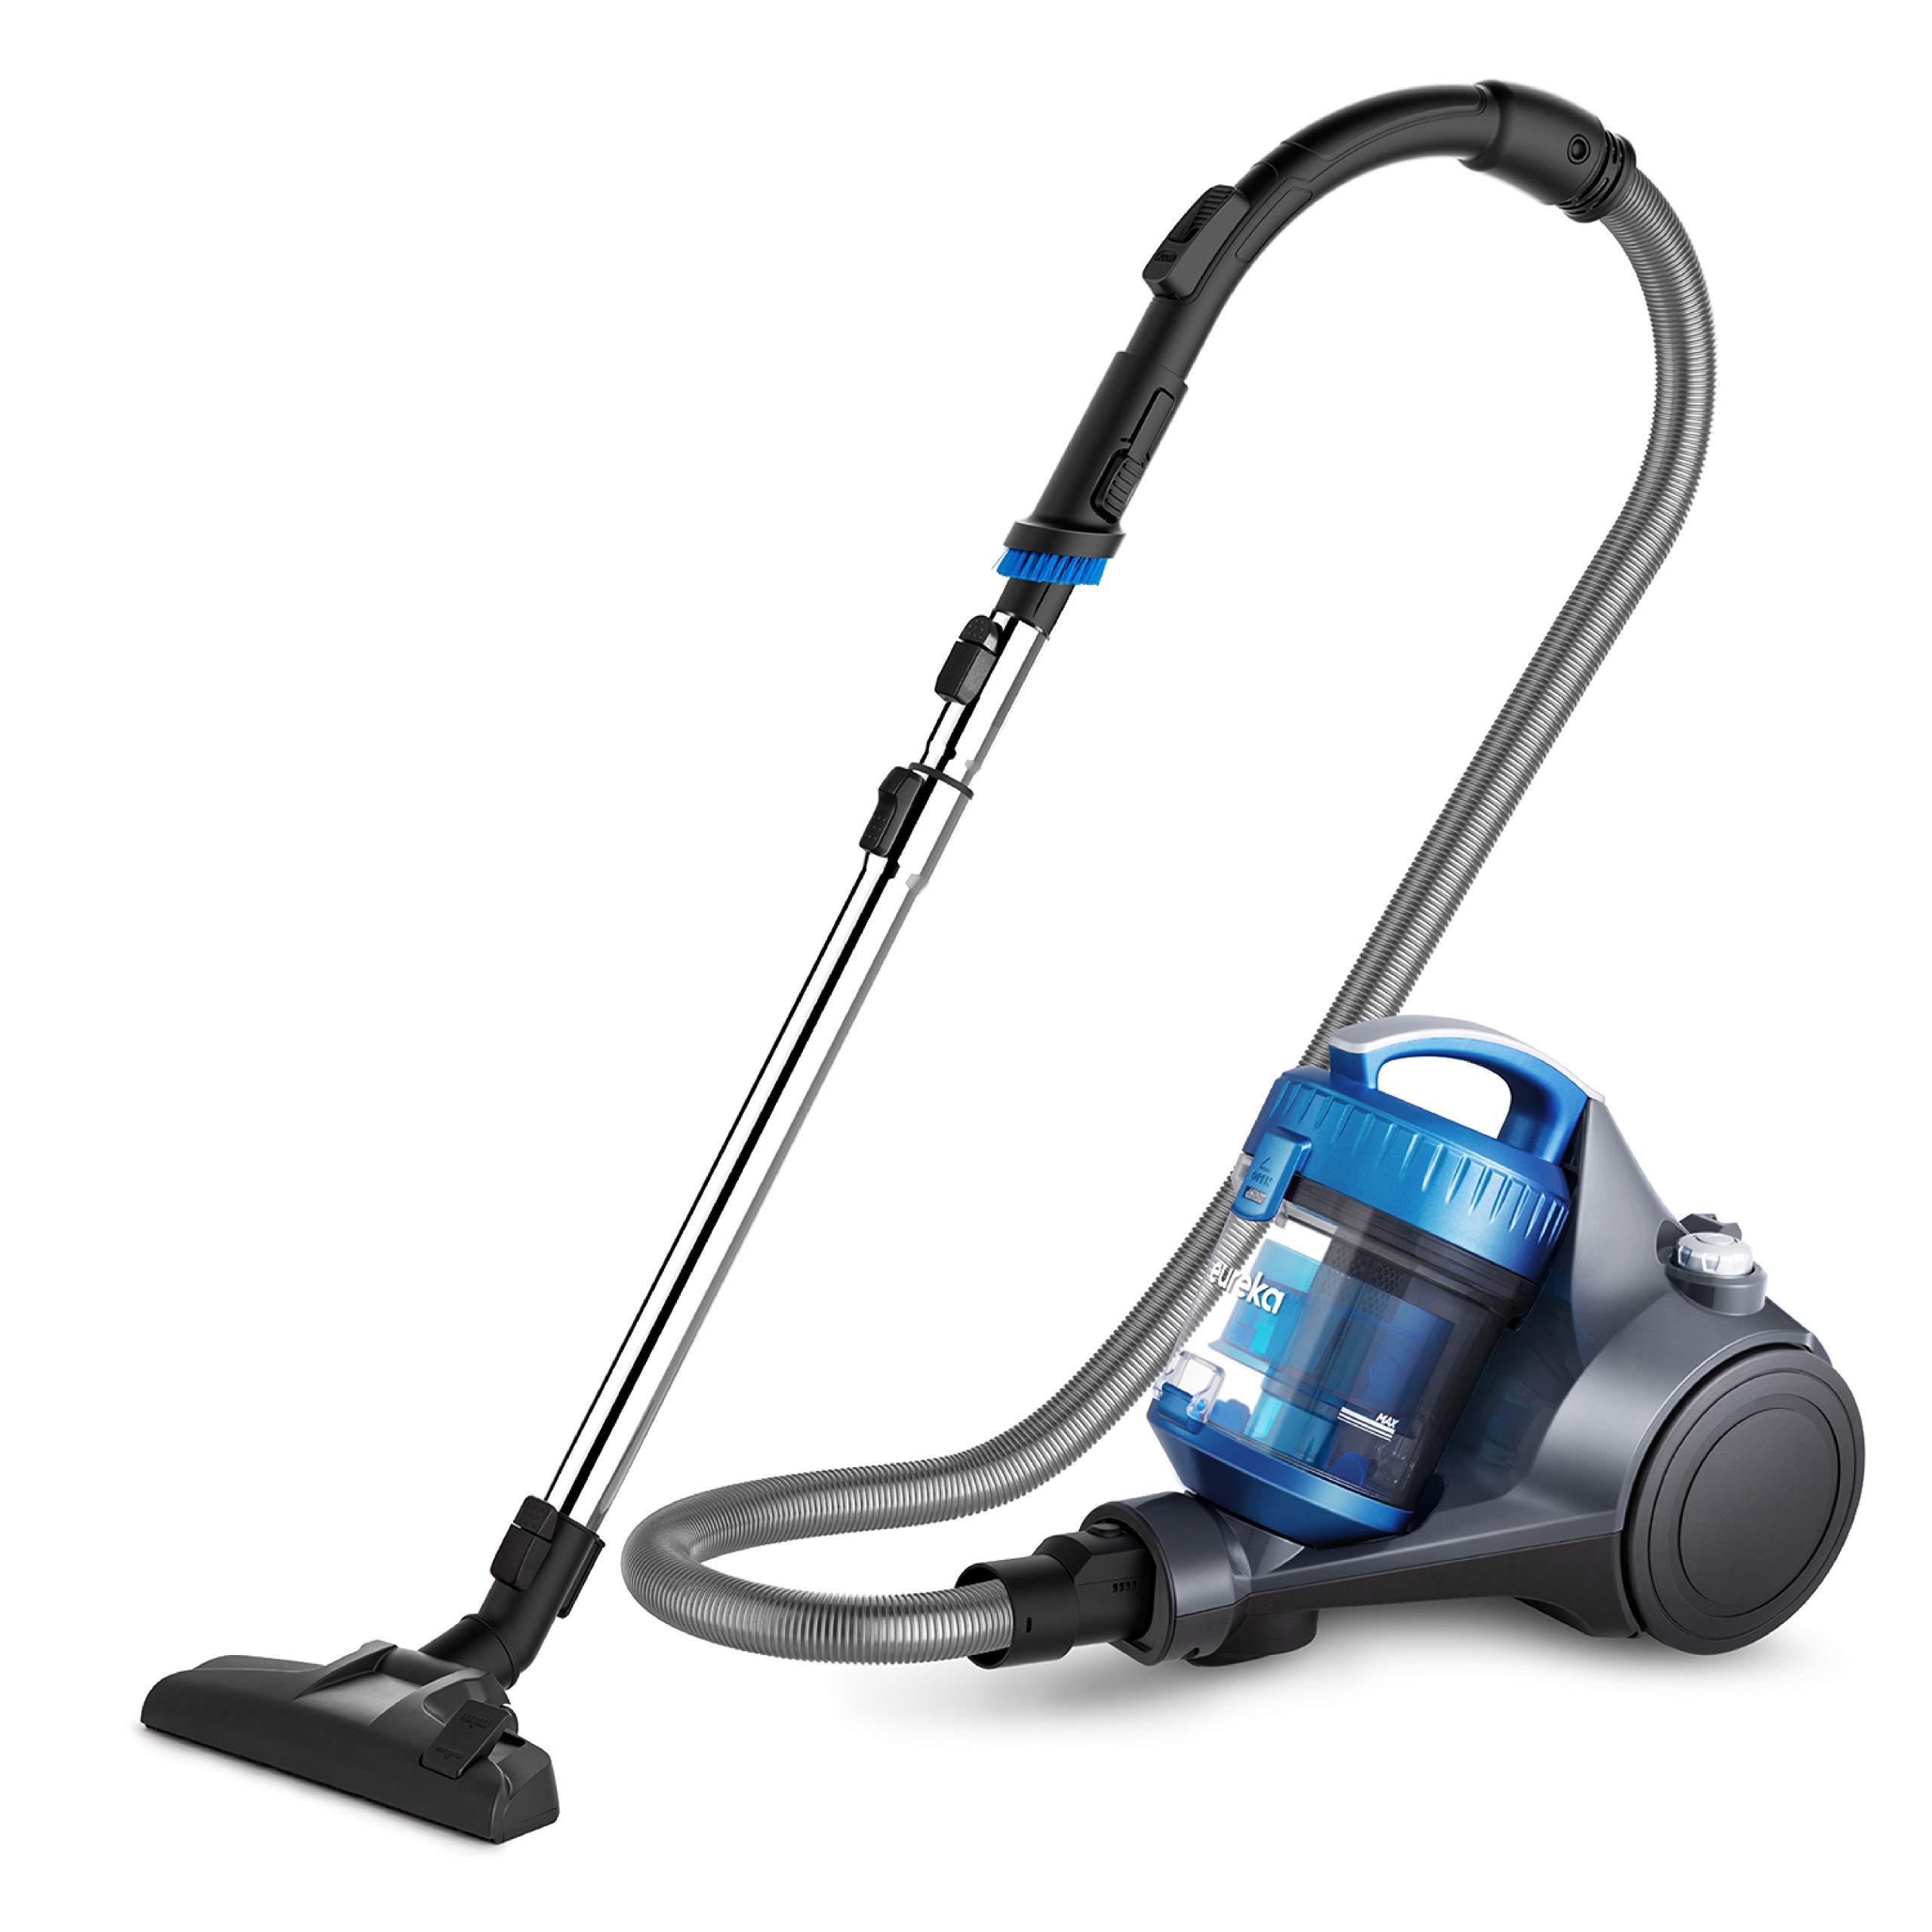 Eureka Bagless Canister Vacuum Cleaner, Lightweight Vac for Carpets and Hard Floors